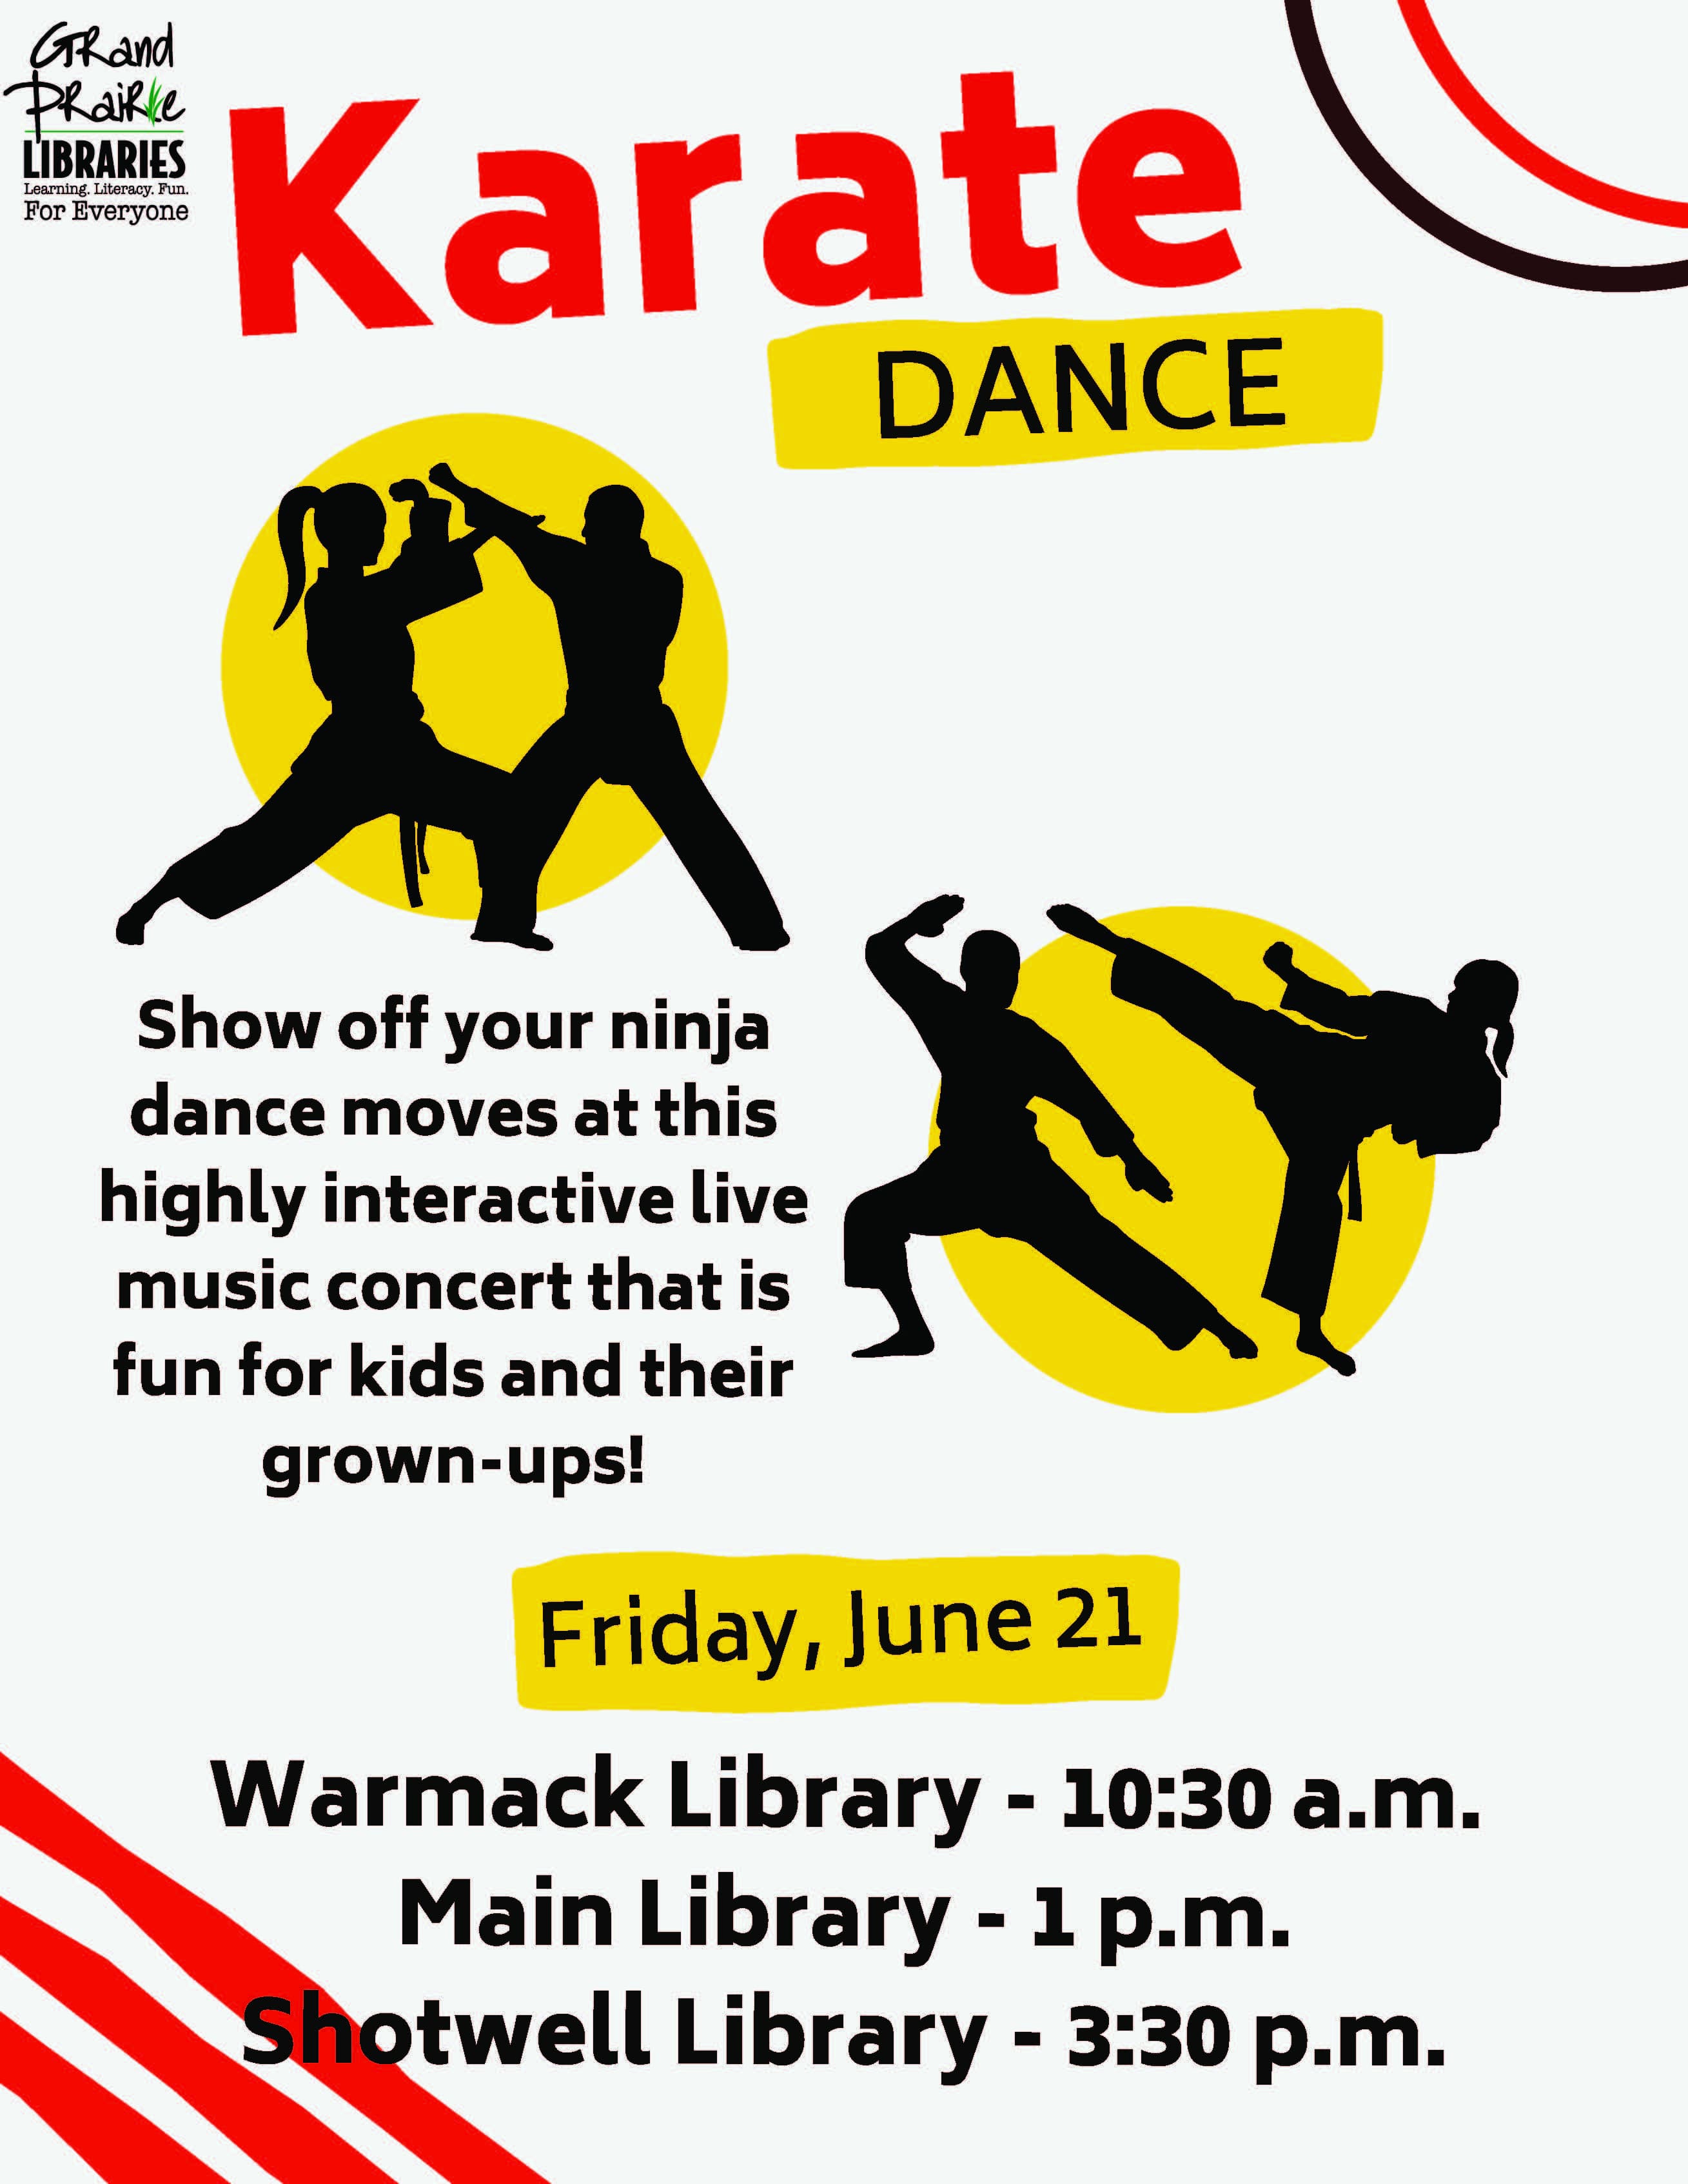 Karate Dance parties at the 3 branches of the library; Warmack at 10:30am, Main at 1pm, and Shotwell at 3:30pm